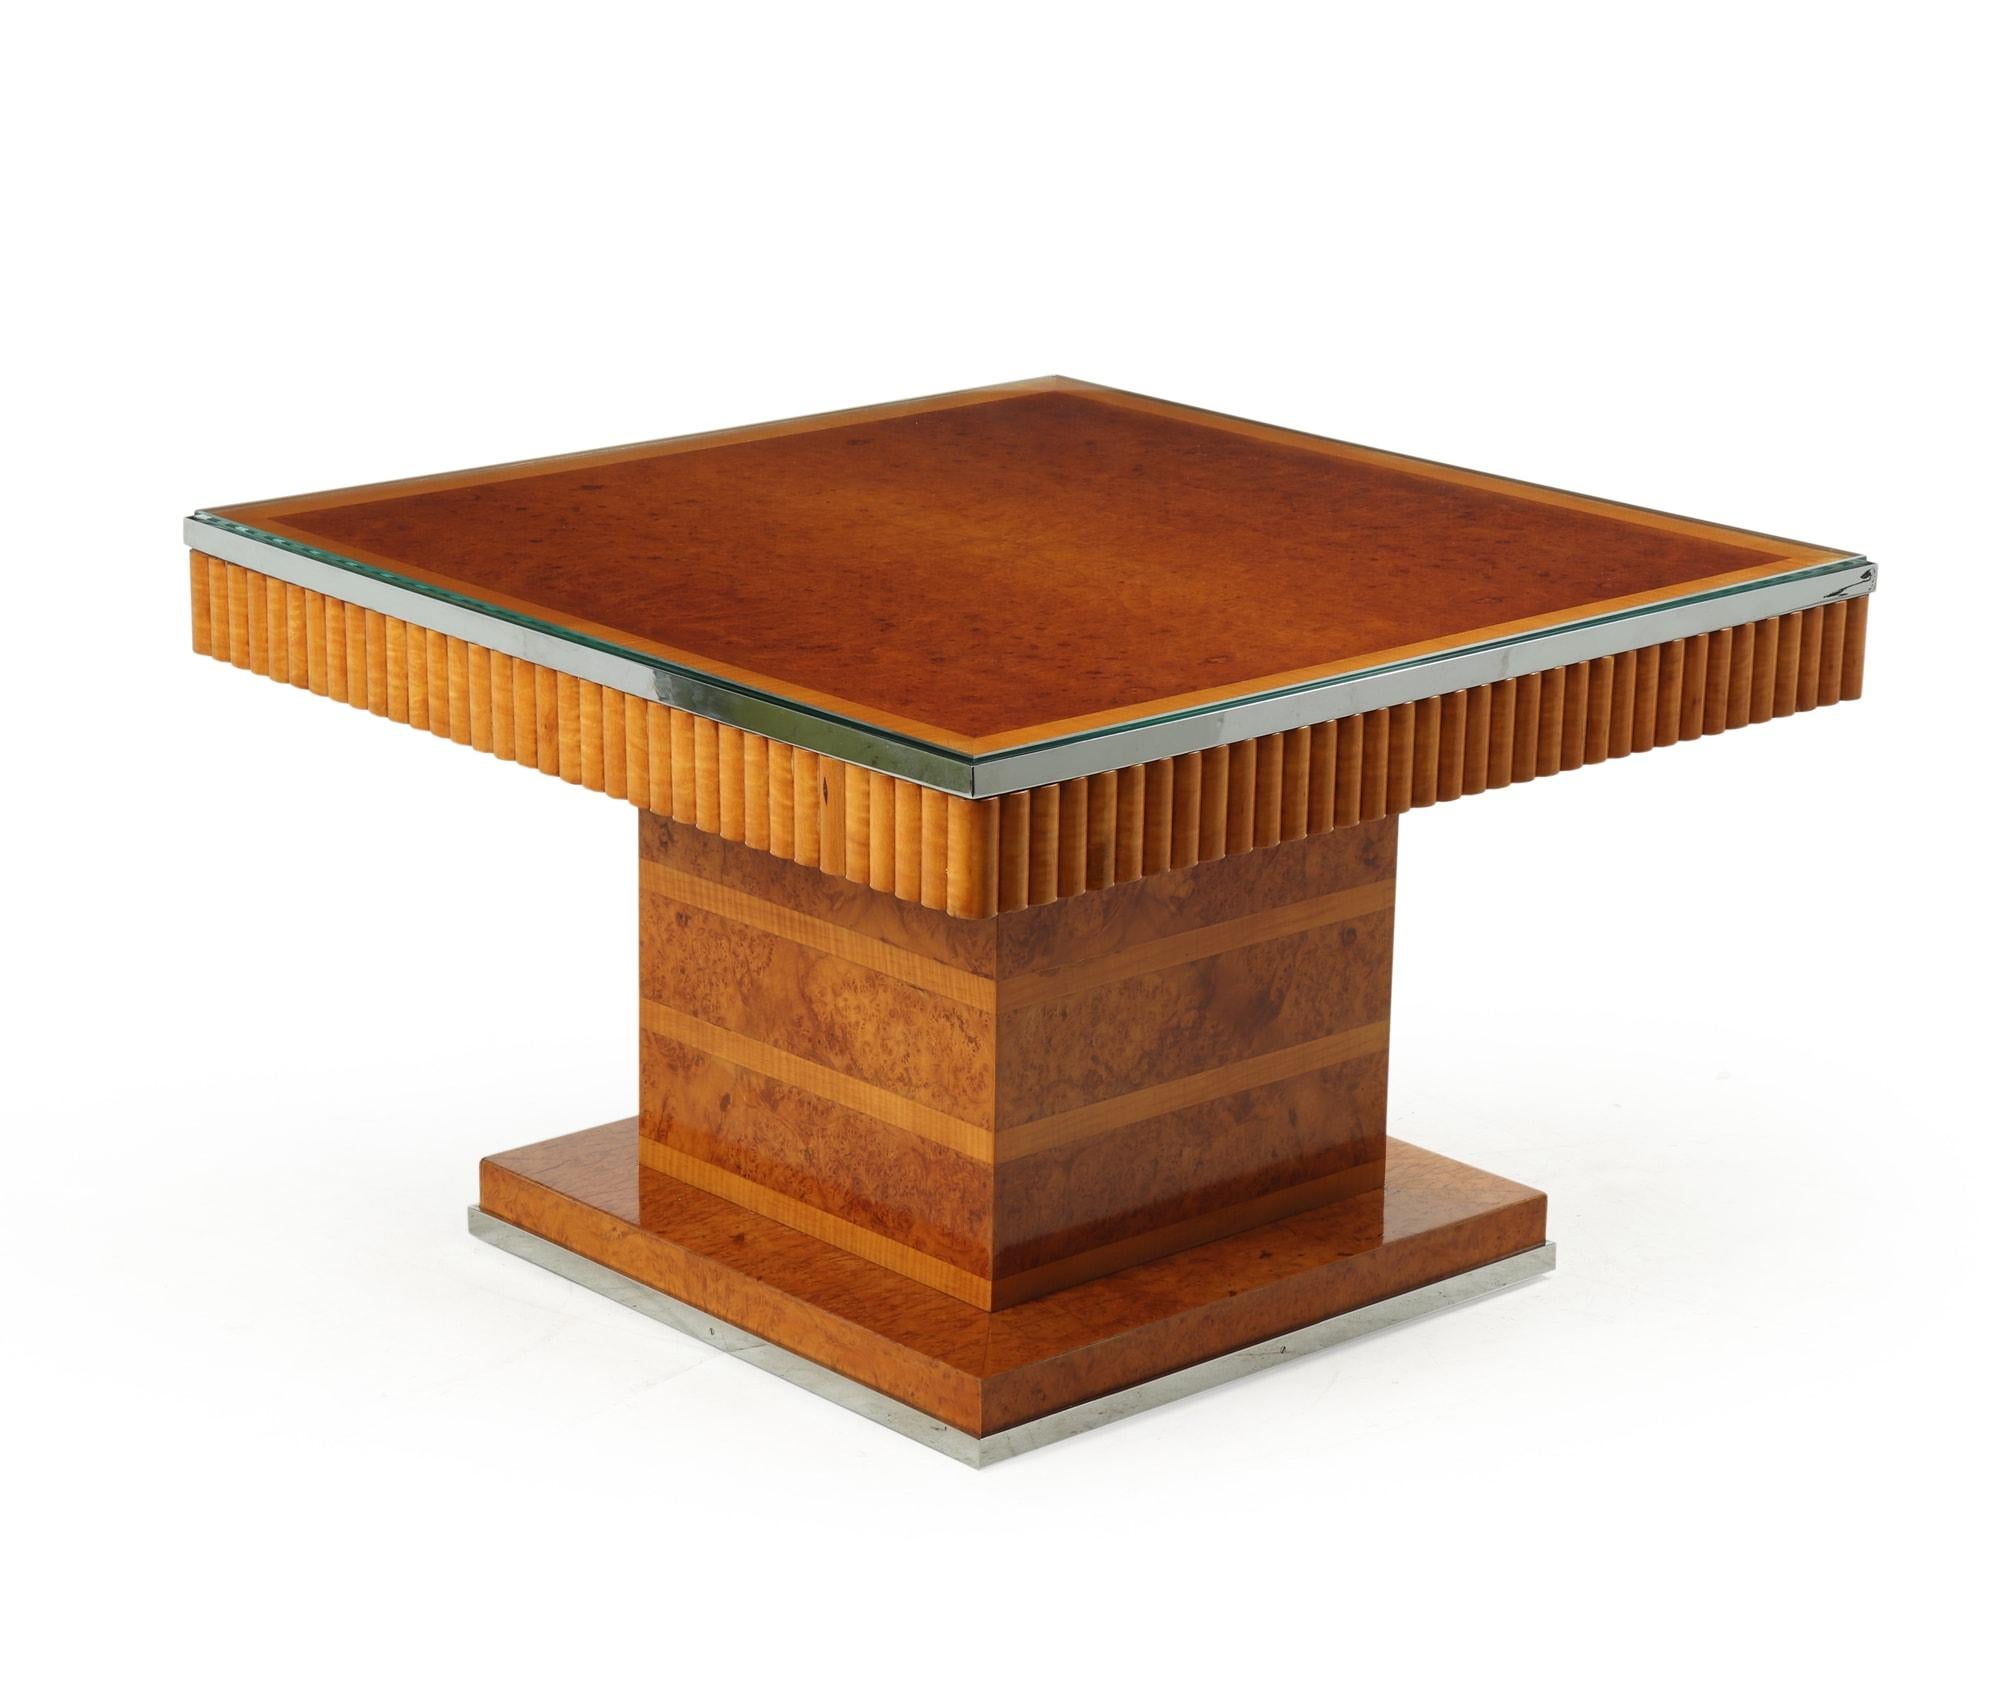 French Art Deco Coffee Table in Amboyna and Sycamore